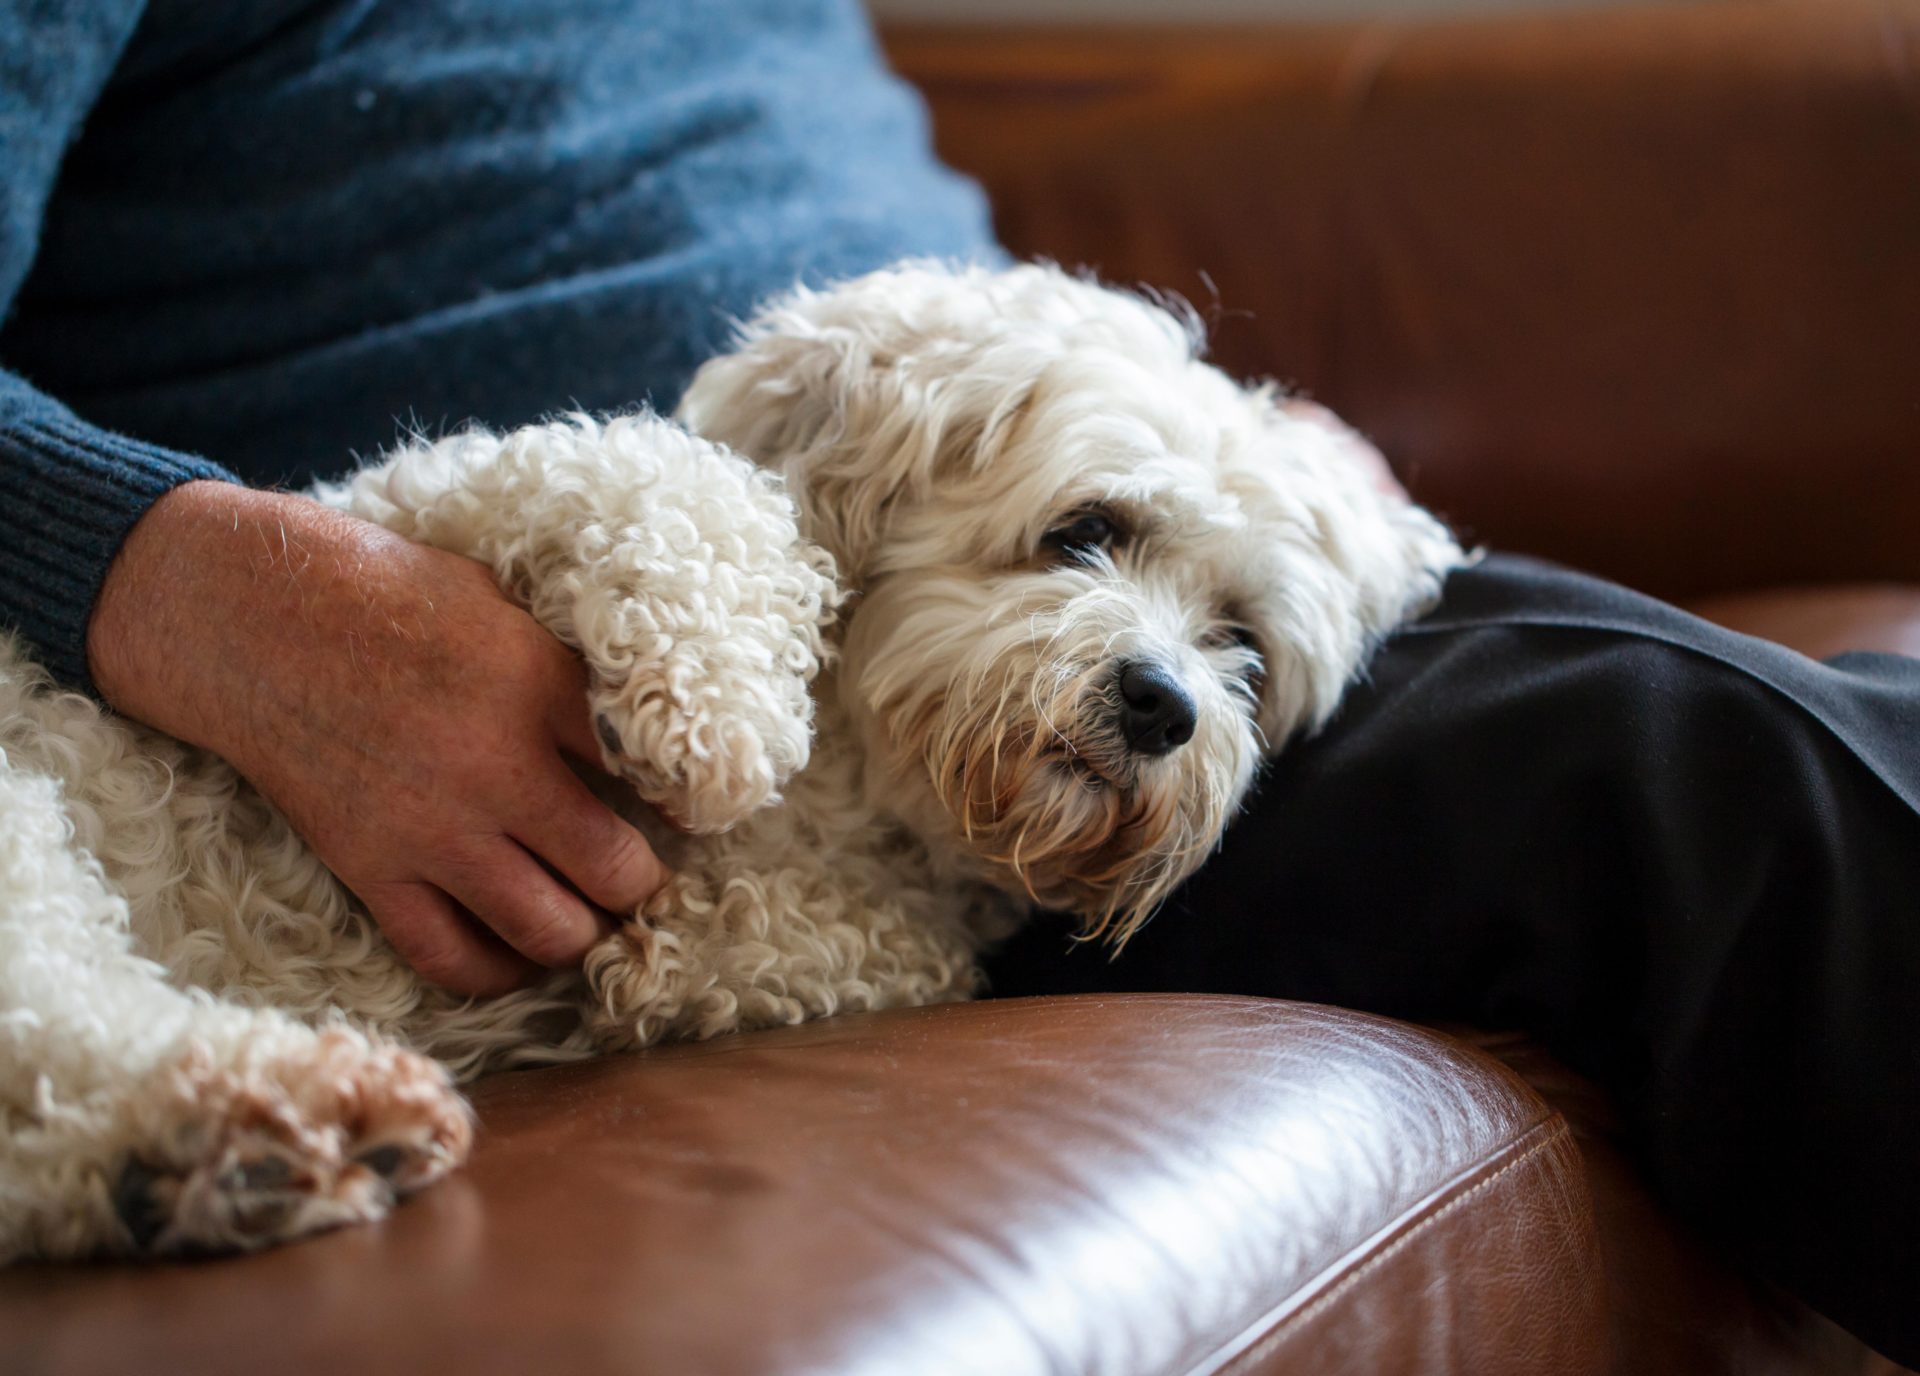 A Shichon dog with an elderly owner on a couch, 18-05-18.